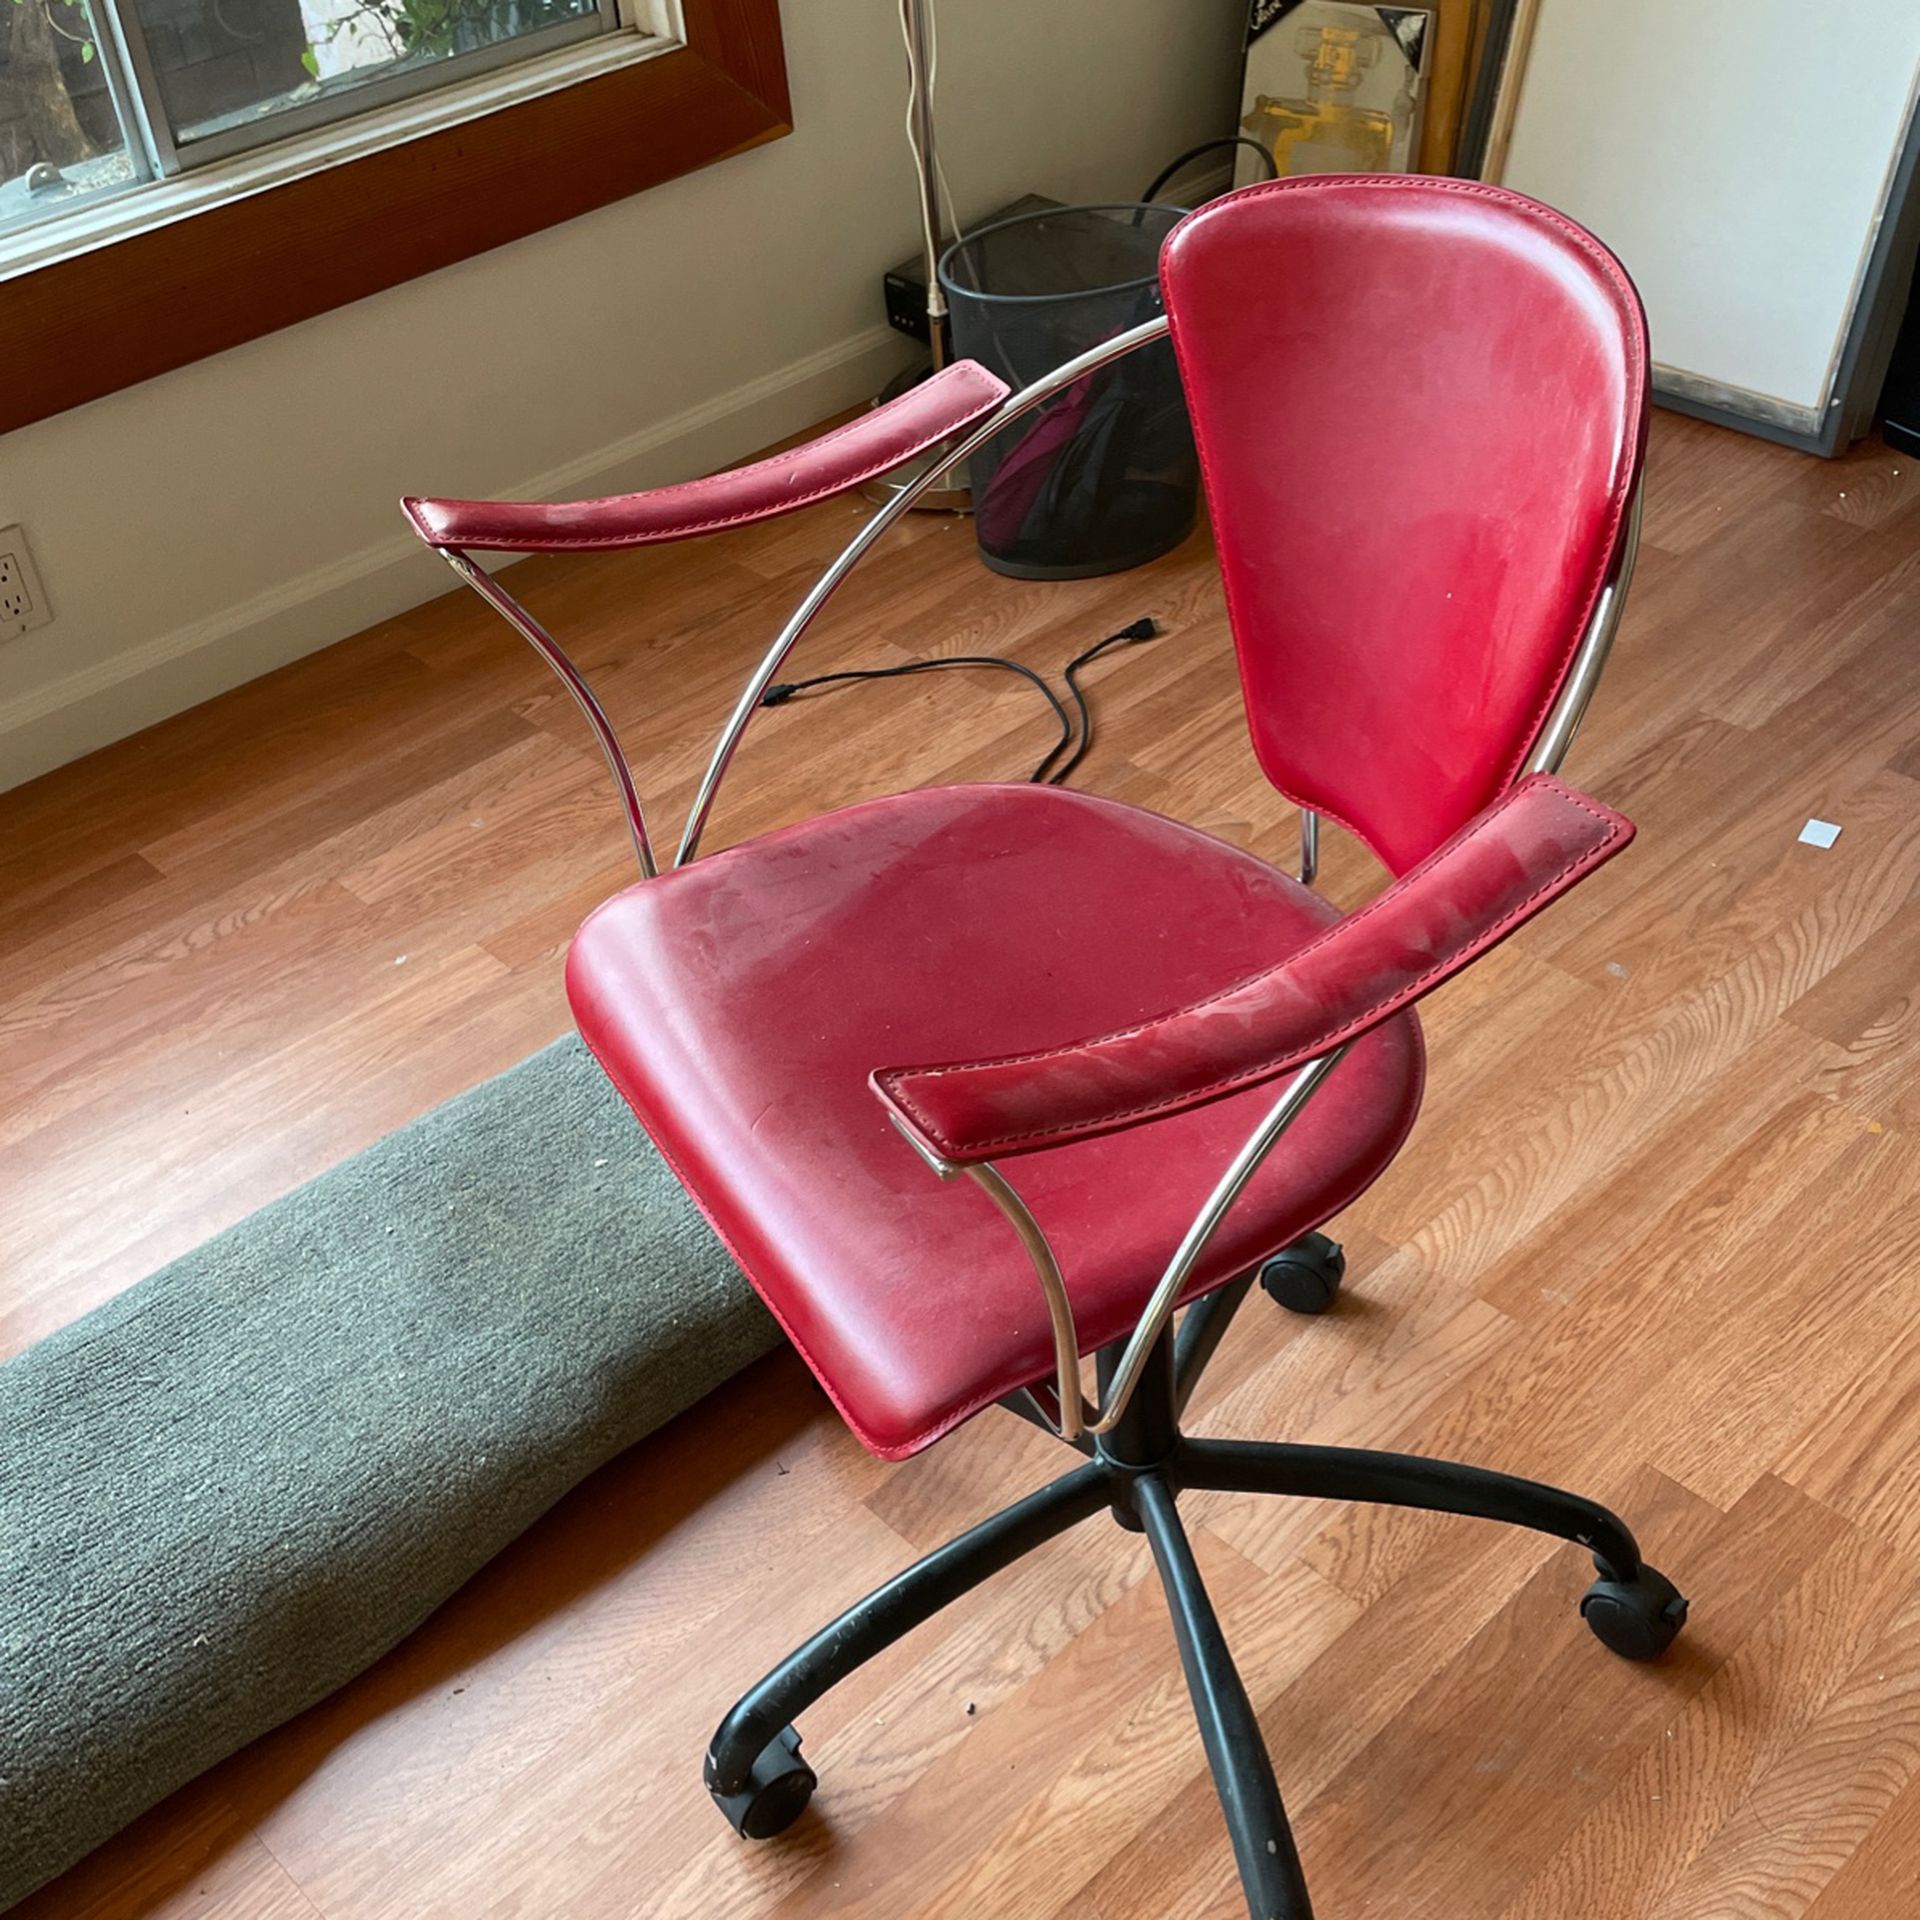 OFFICE CHAIR FREE